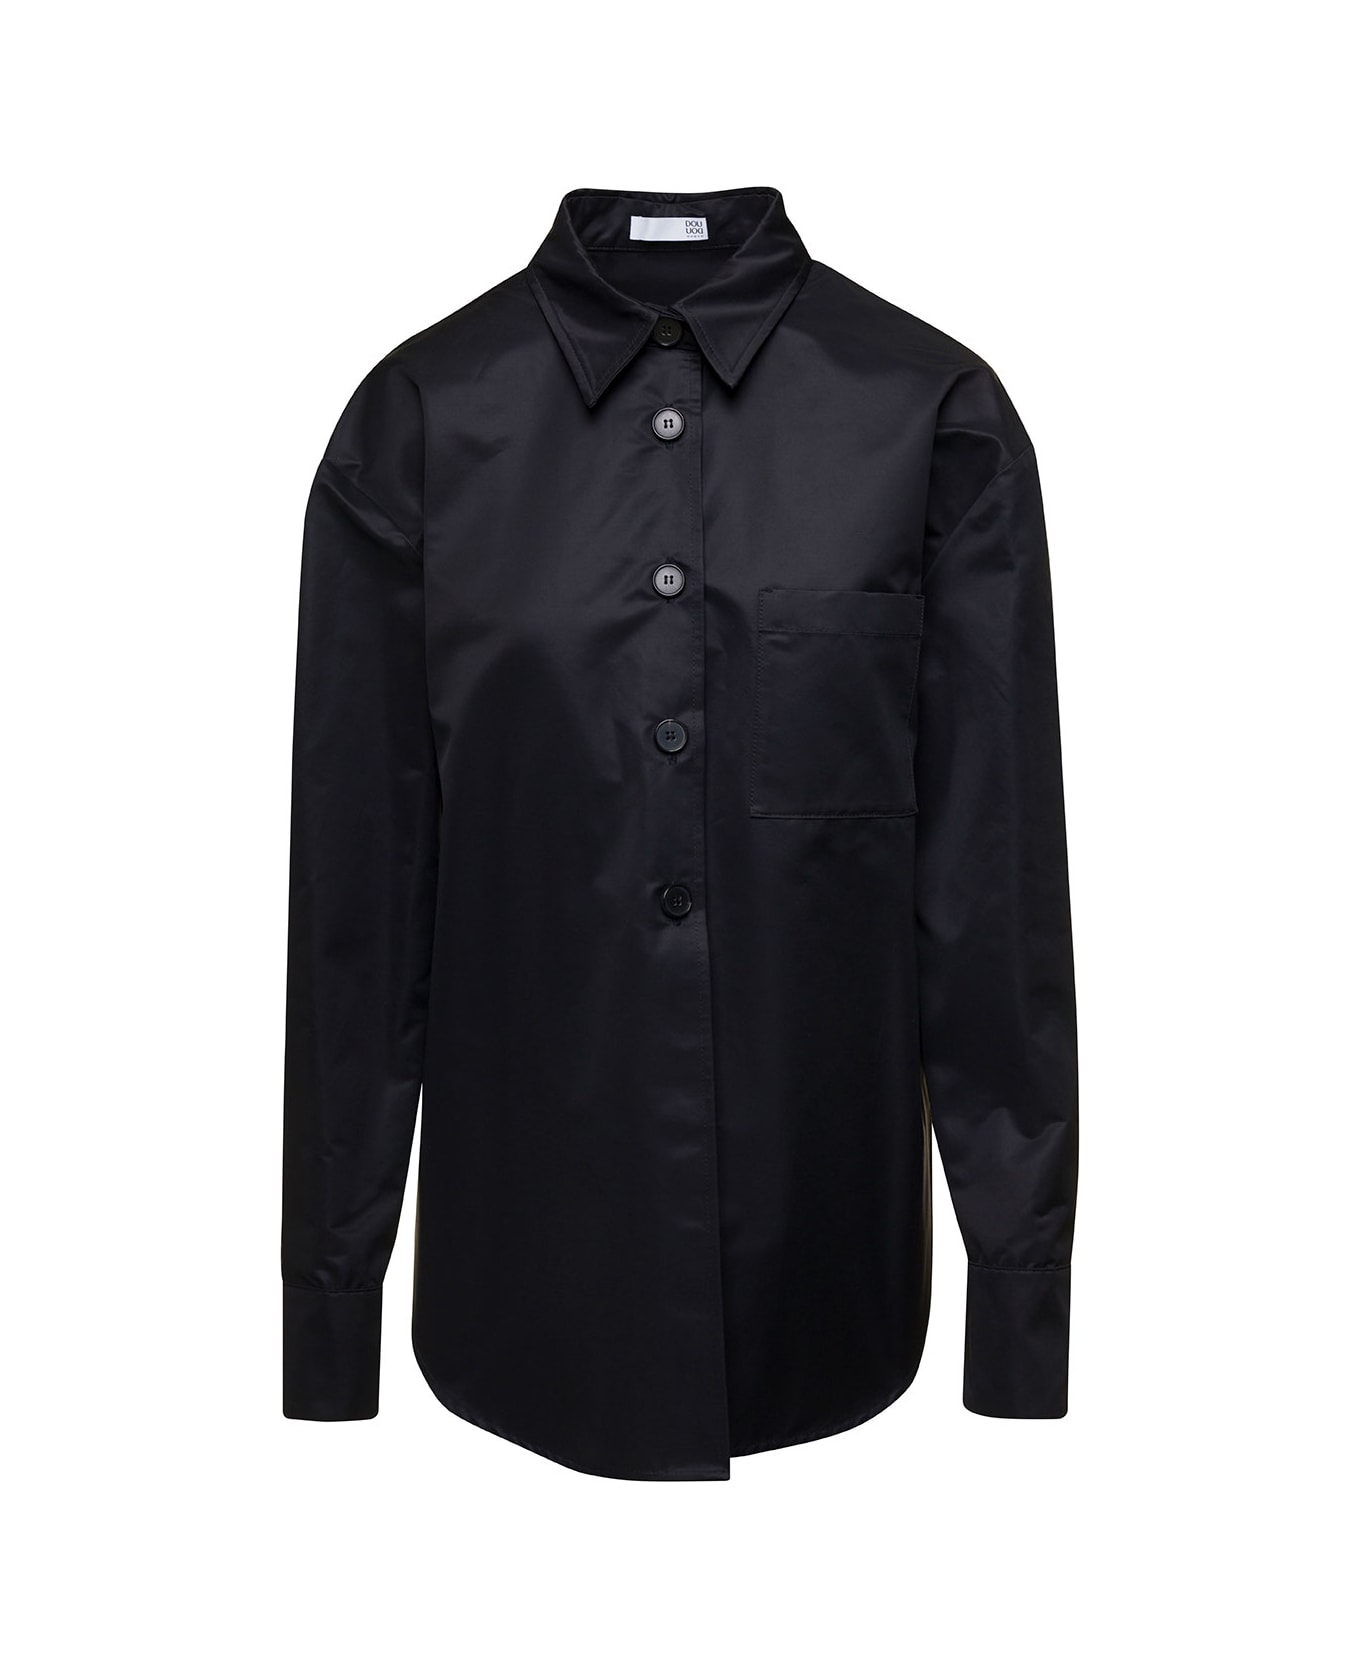 Douuod Black Long-sleeve Shirt With Tonal Buttons In Cotton Blend Woman - Black